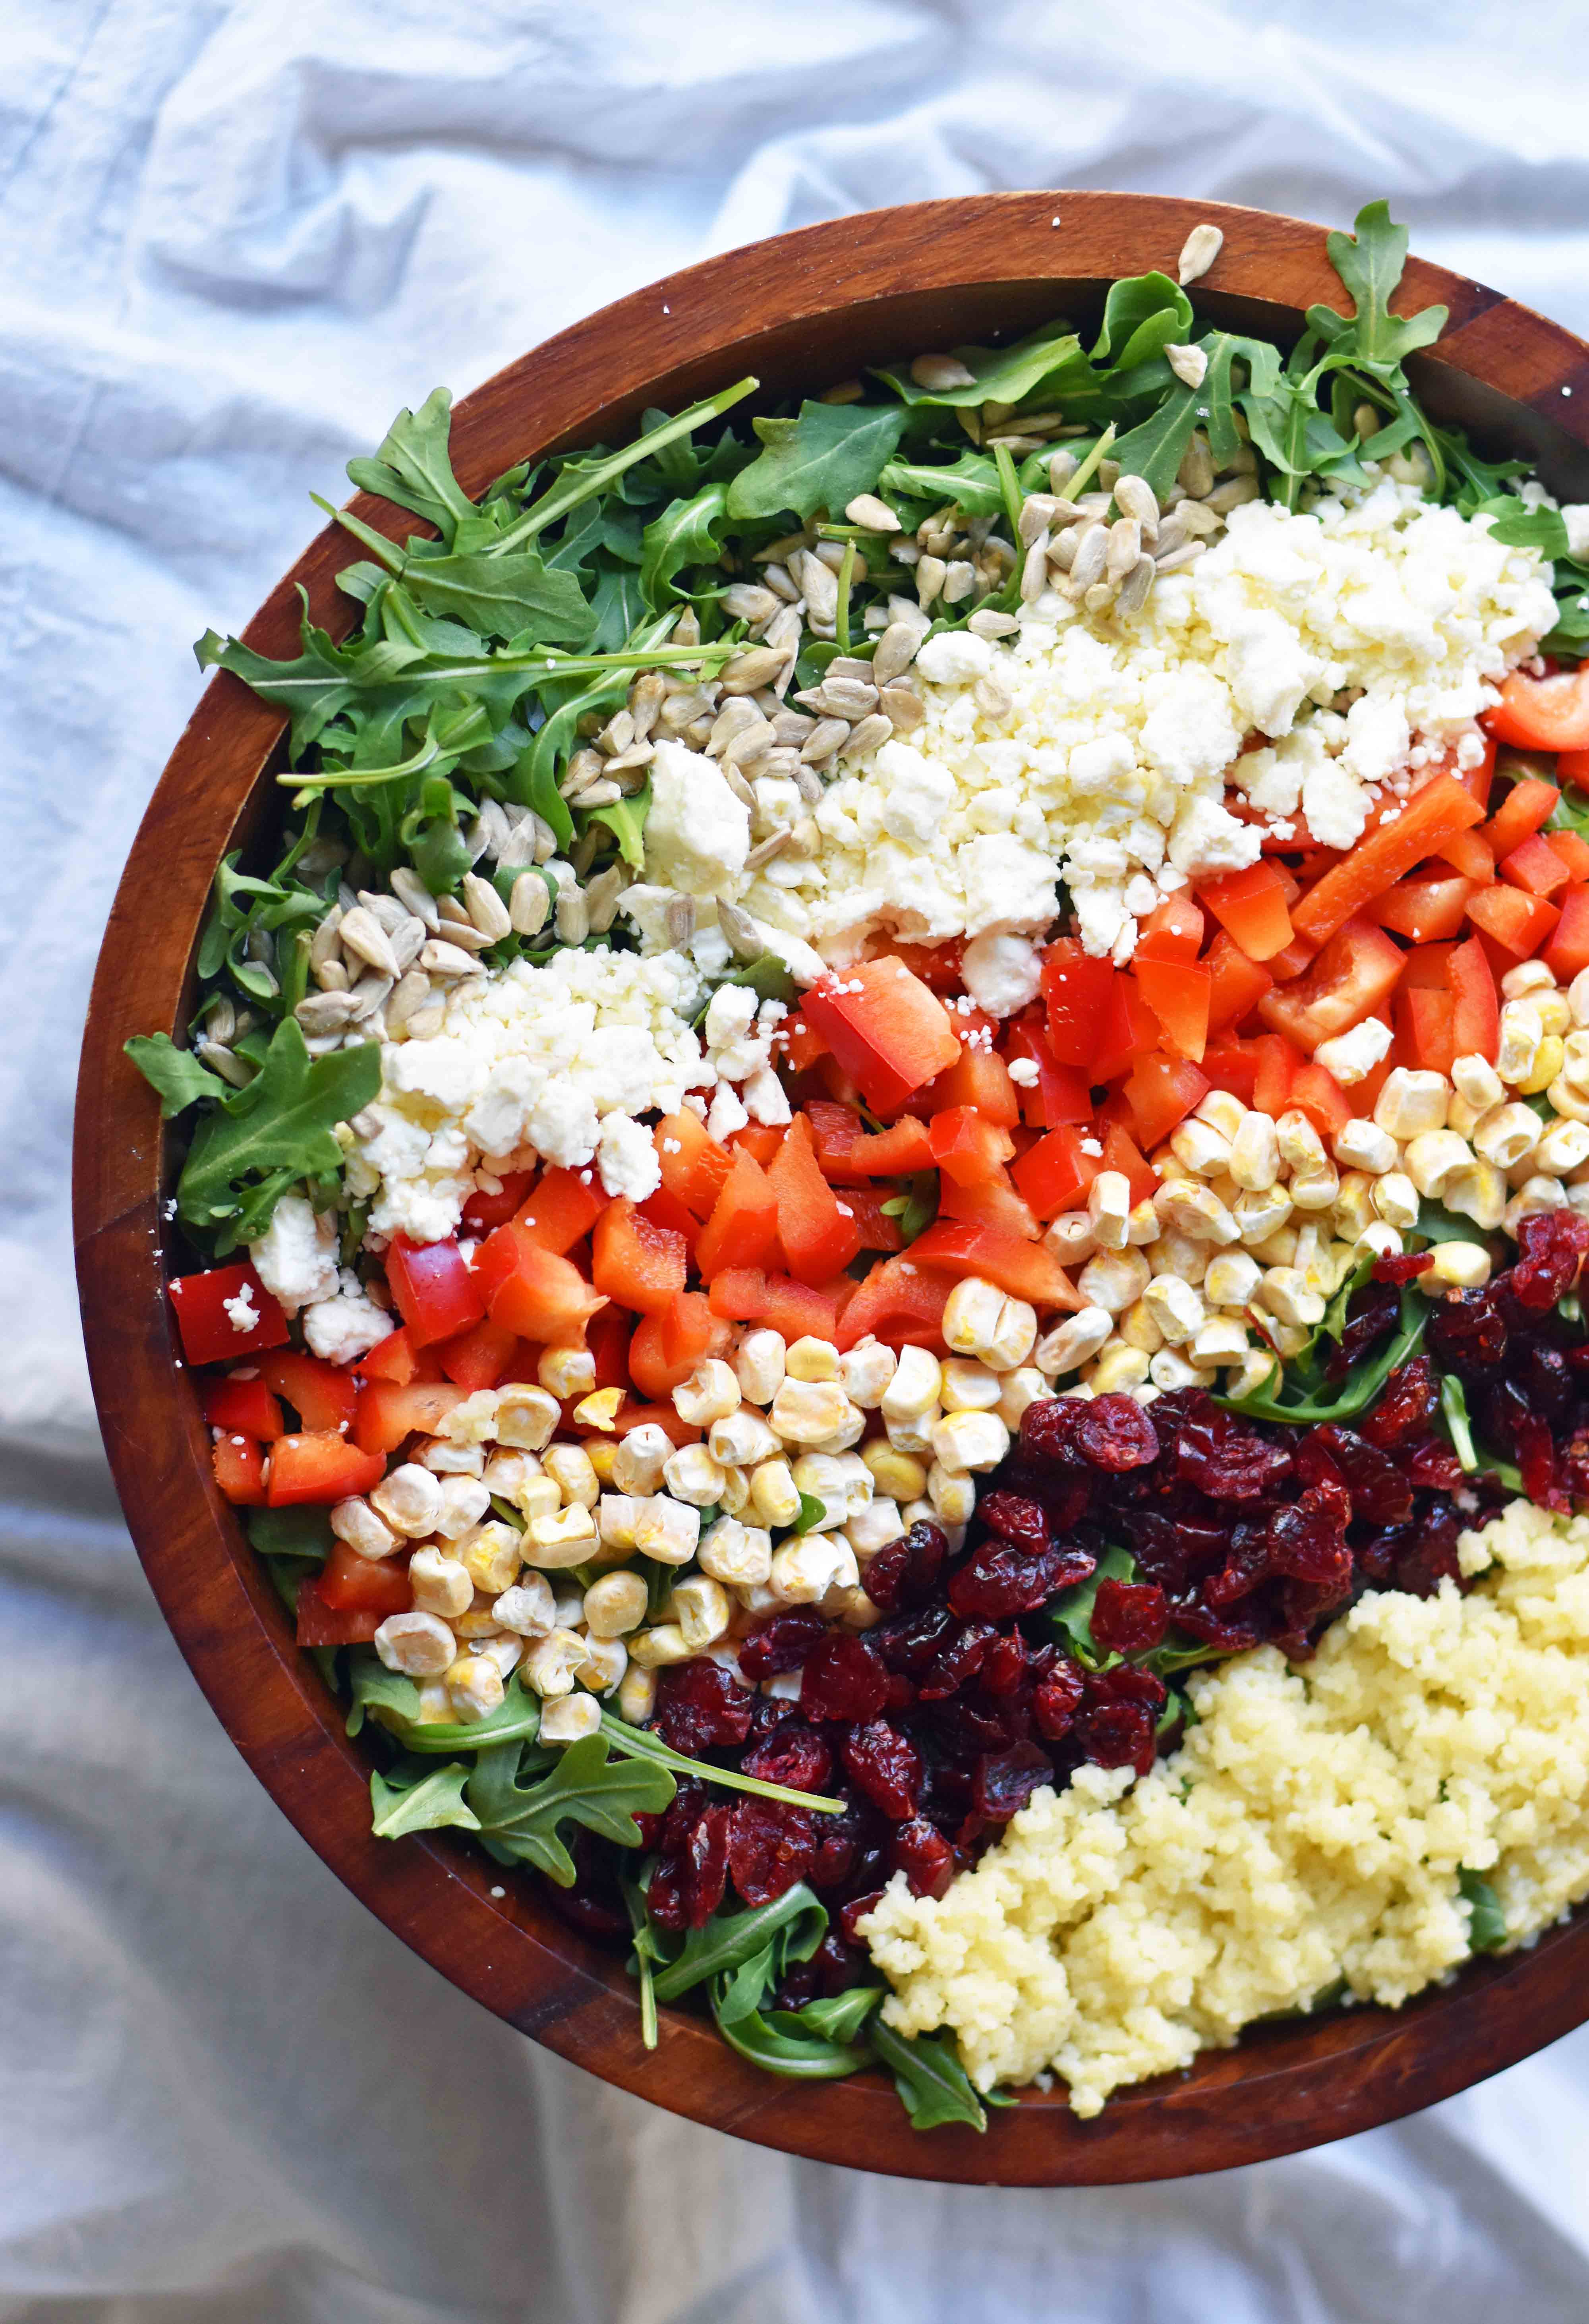 Chopped Salad with fresh arugula, dried cranberries, crunchy red peppers, feta cheese, sweet corn, and couscous tossed with a creamy basil dressing. 